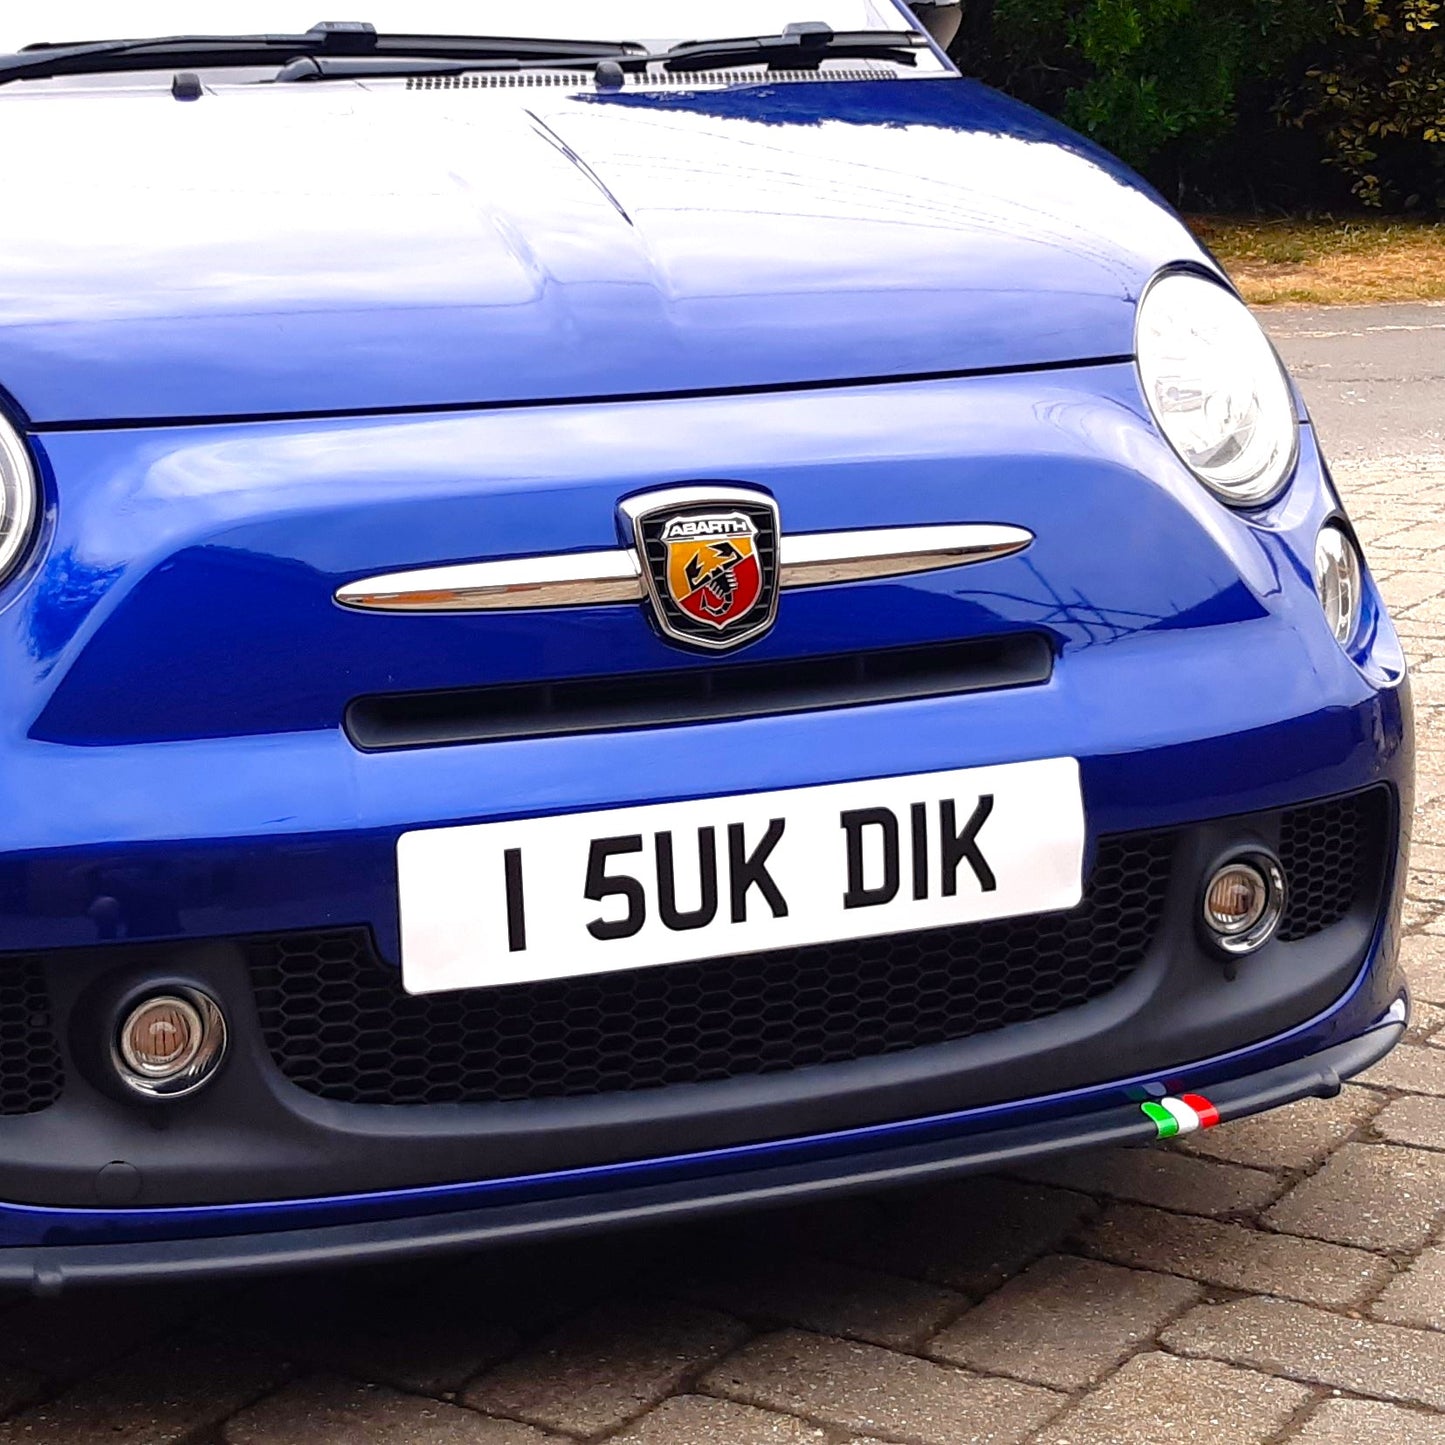 2 Joke Number Plate Stickers With "I 5UK DIK"